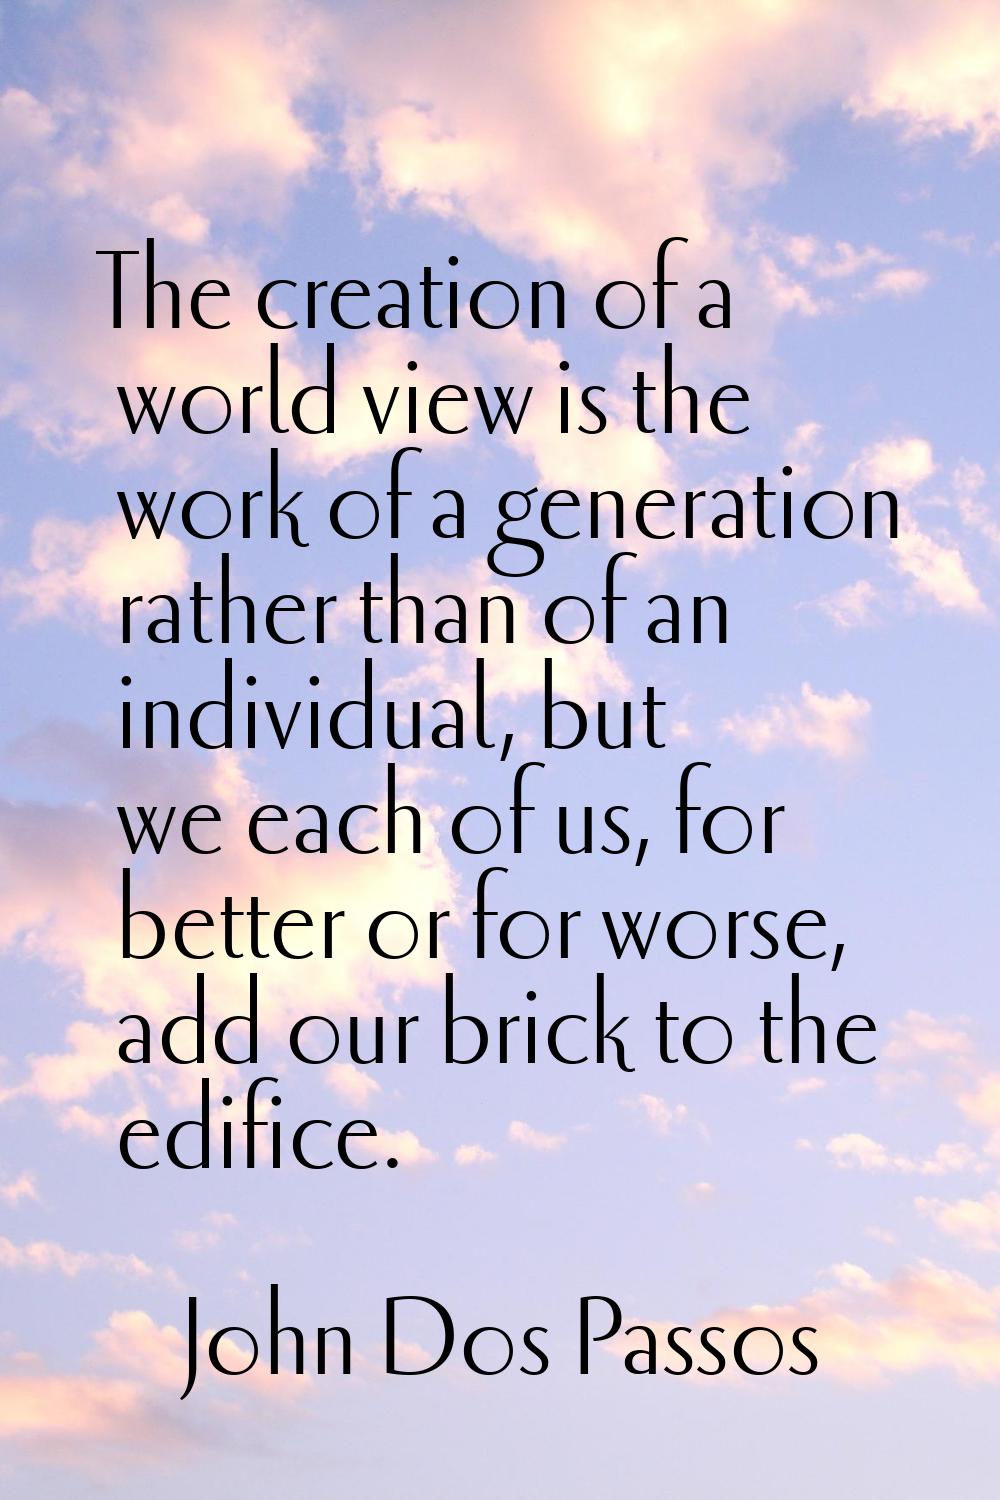 The creation of a world view is the work of a generation rather than of an individual, but we each 